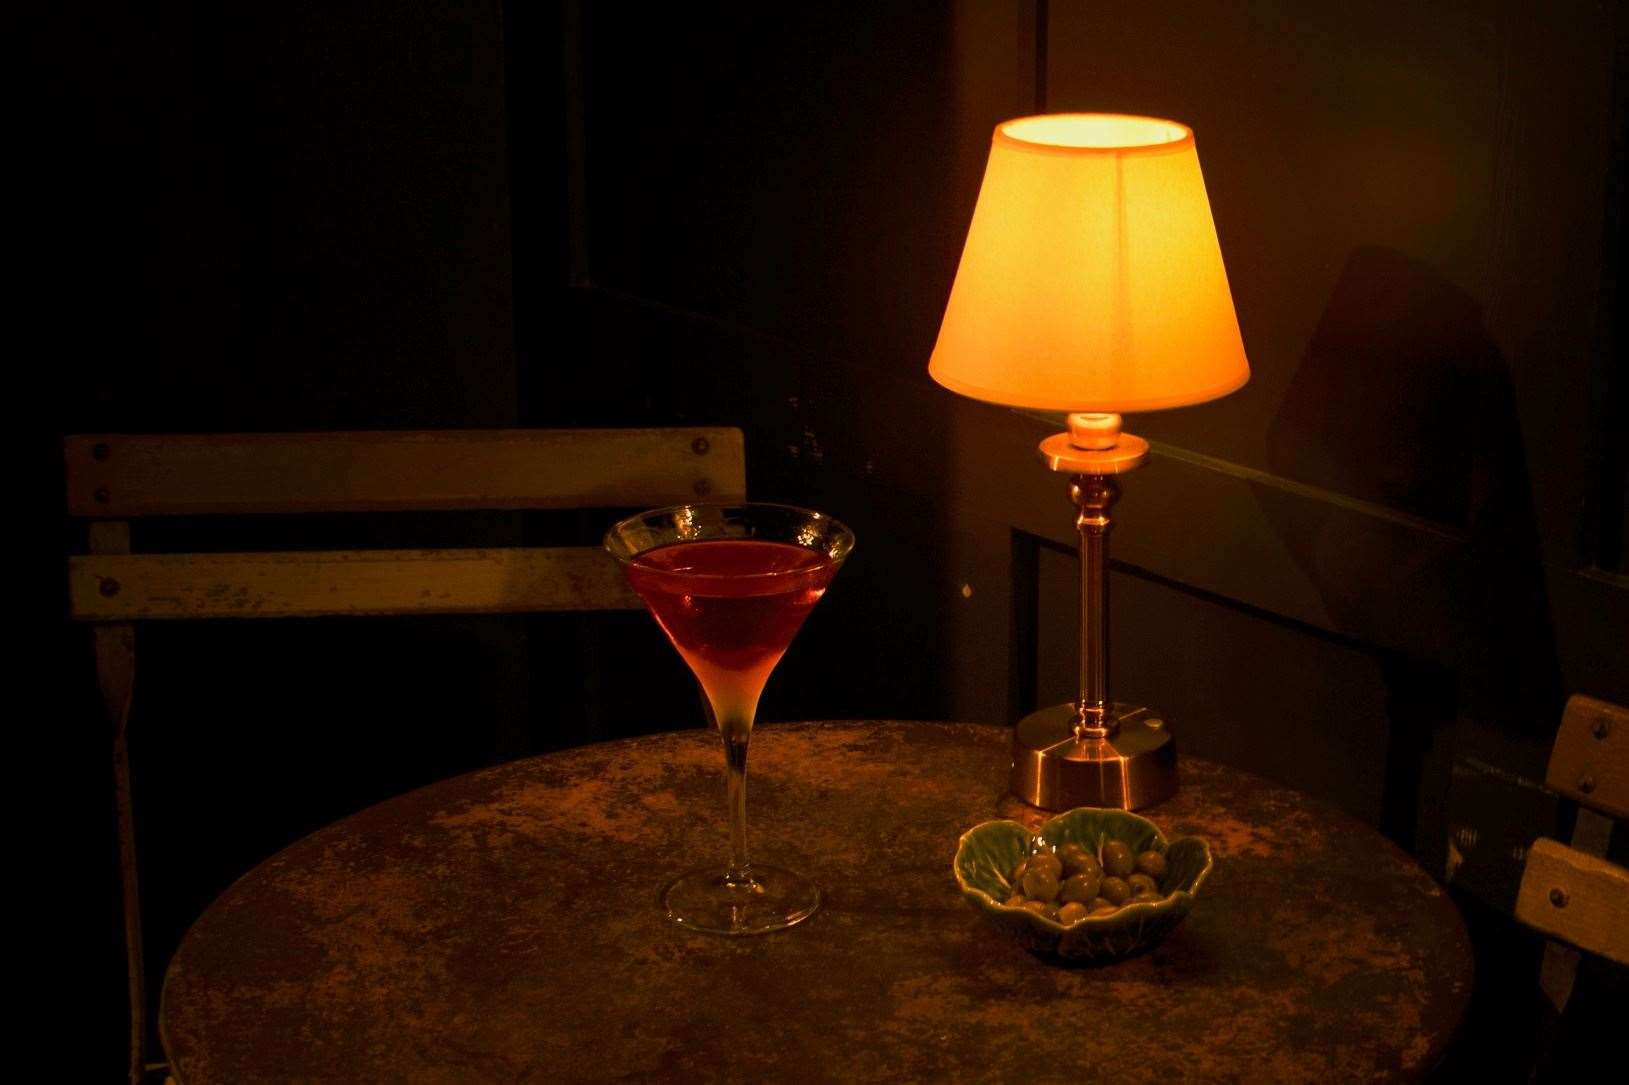 The hidden speakeasy at the Potting Shed in Folkestone serves Prohibition-era-style cocktails